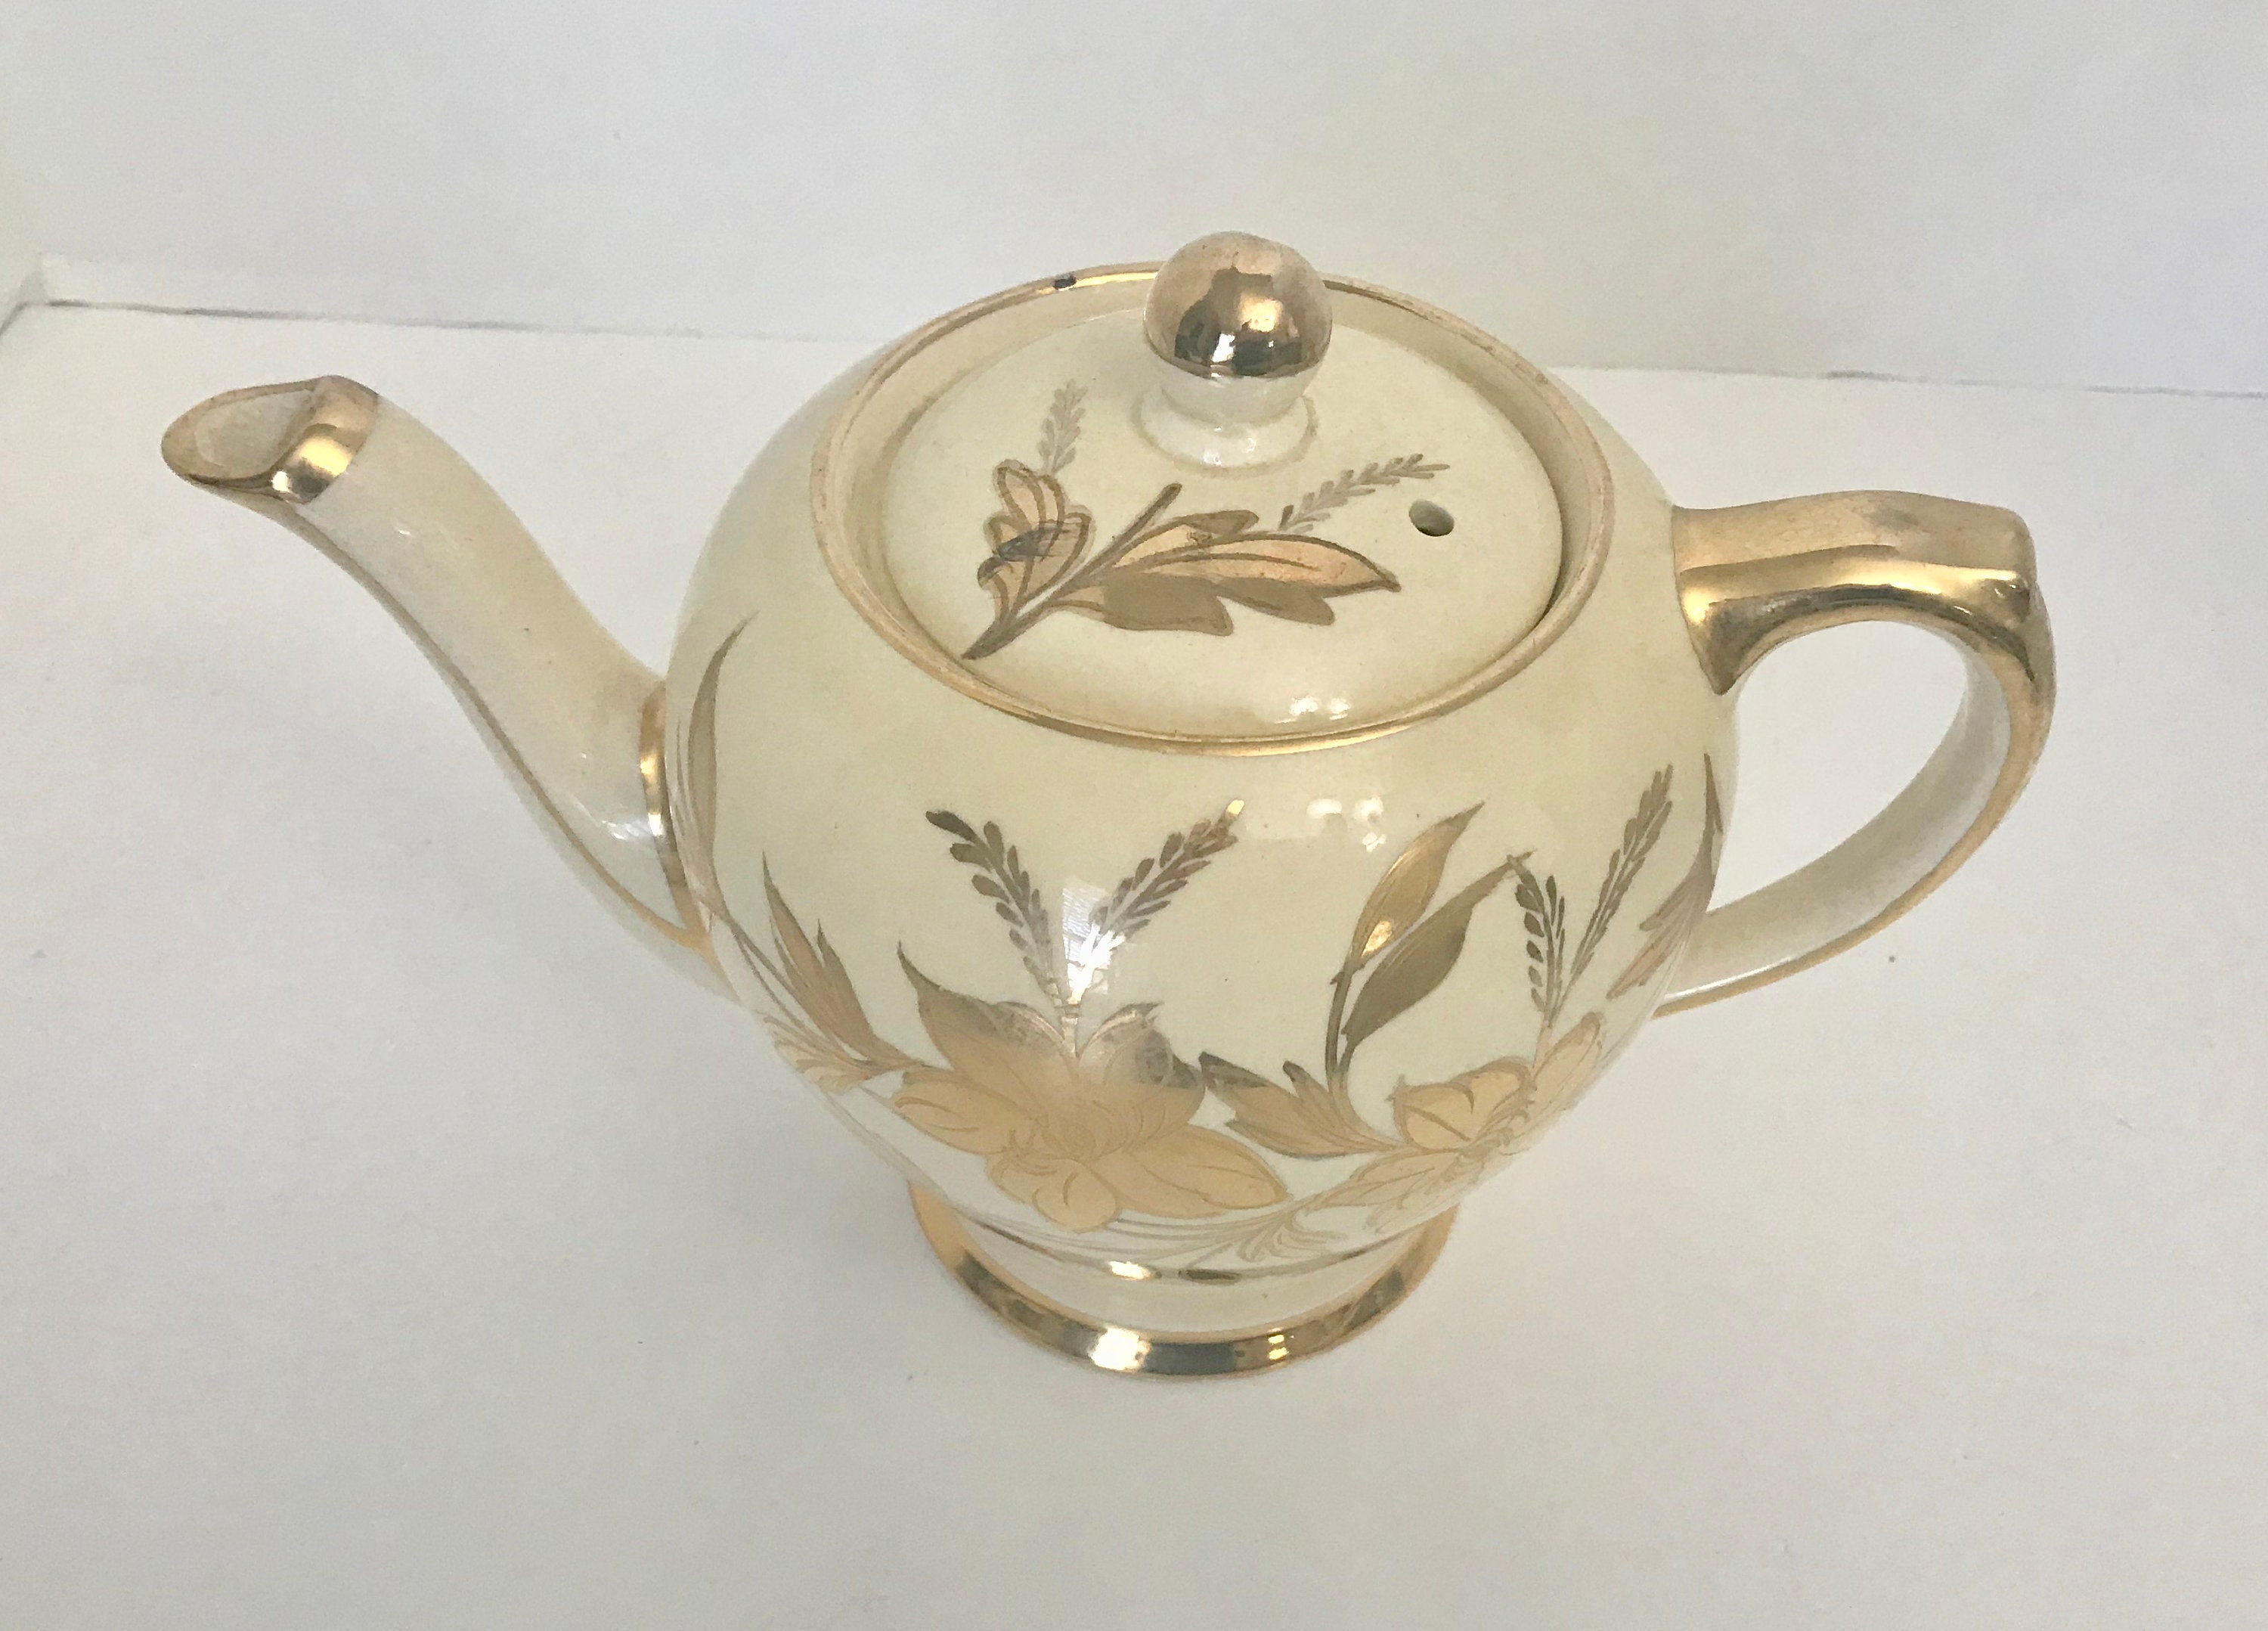 Sadler Teapot Cream and Gold 757 Floral 6 Cup Teapot - Etsy